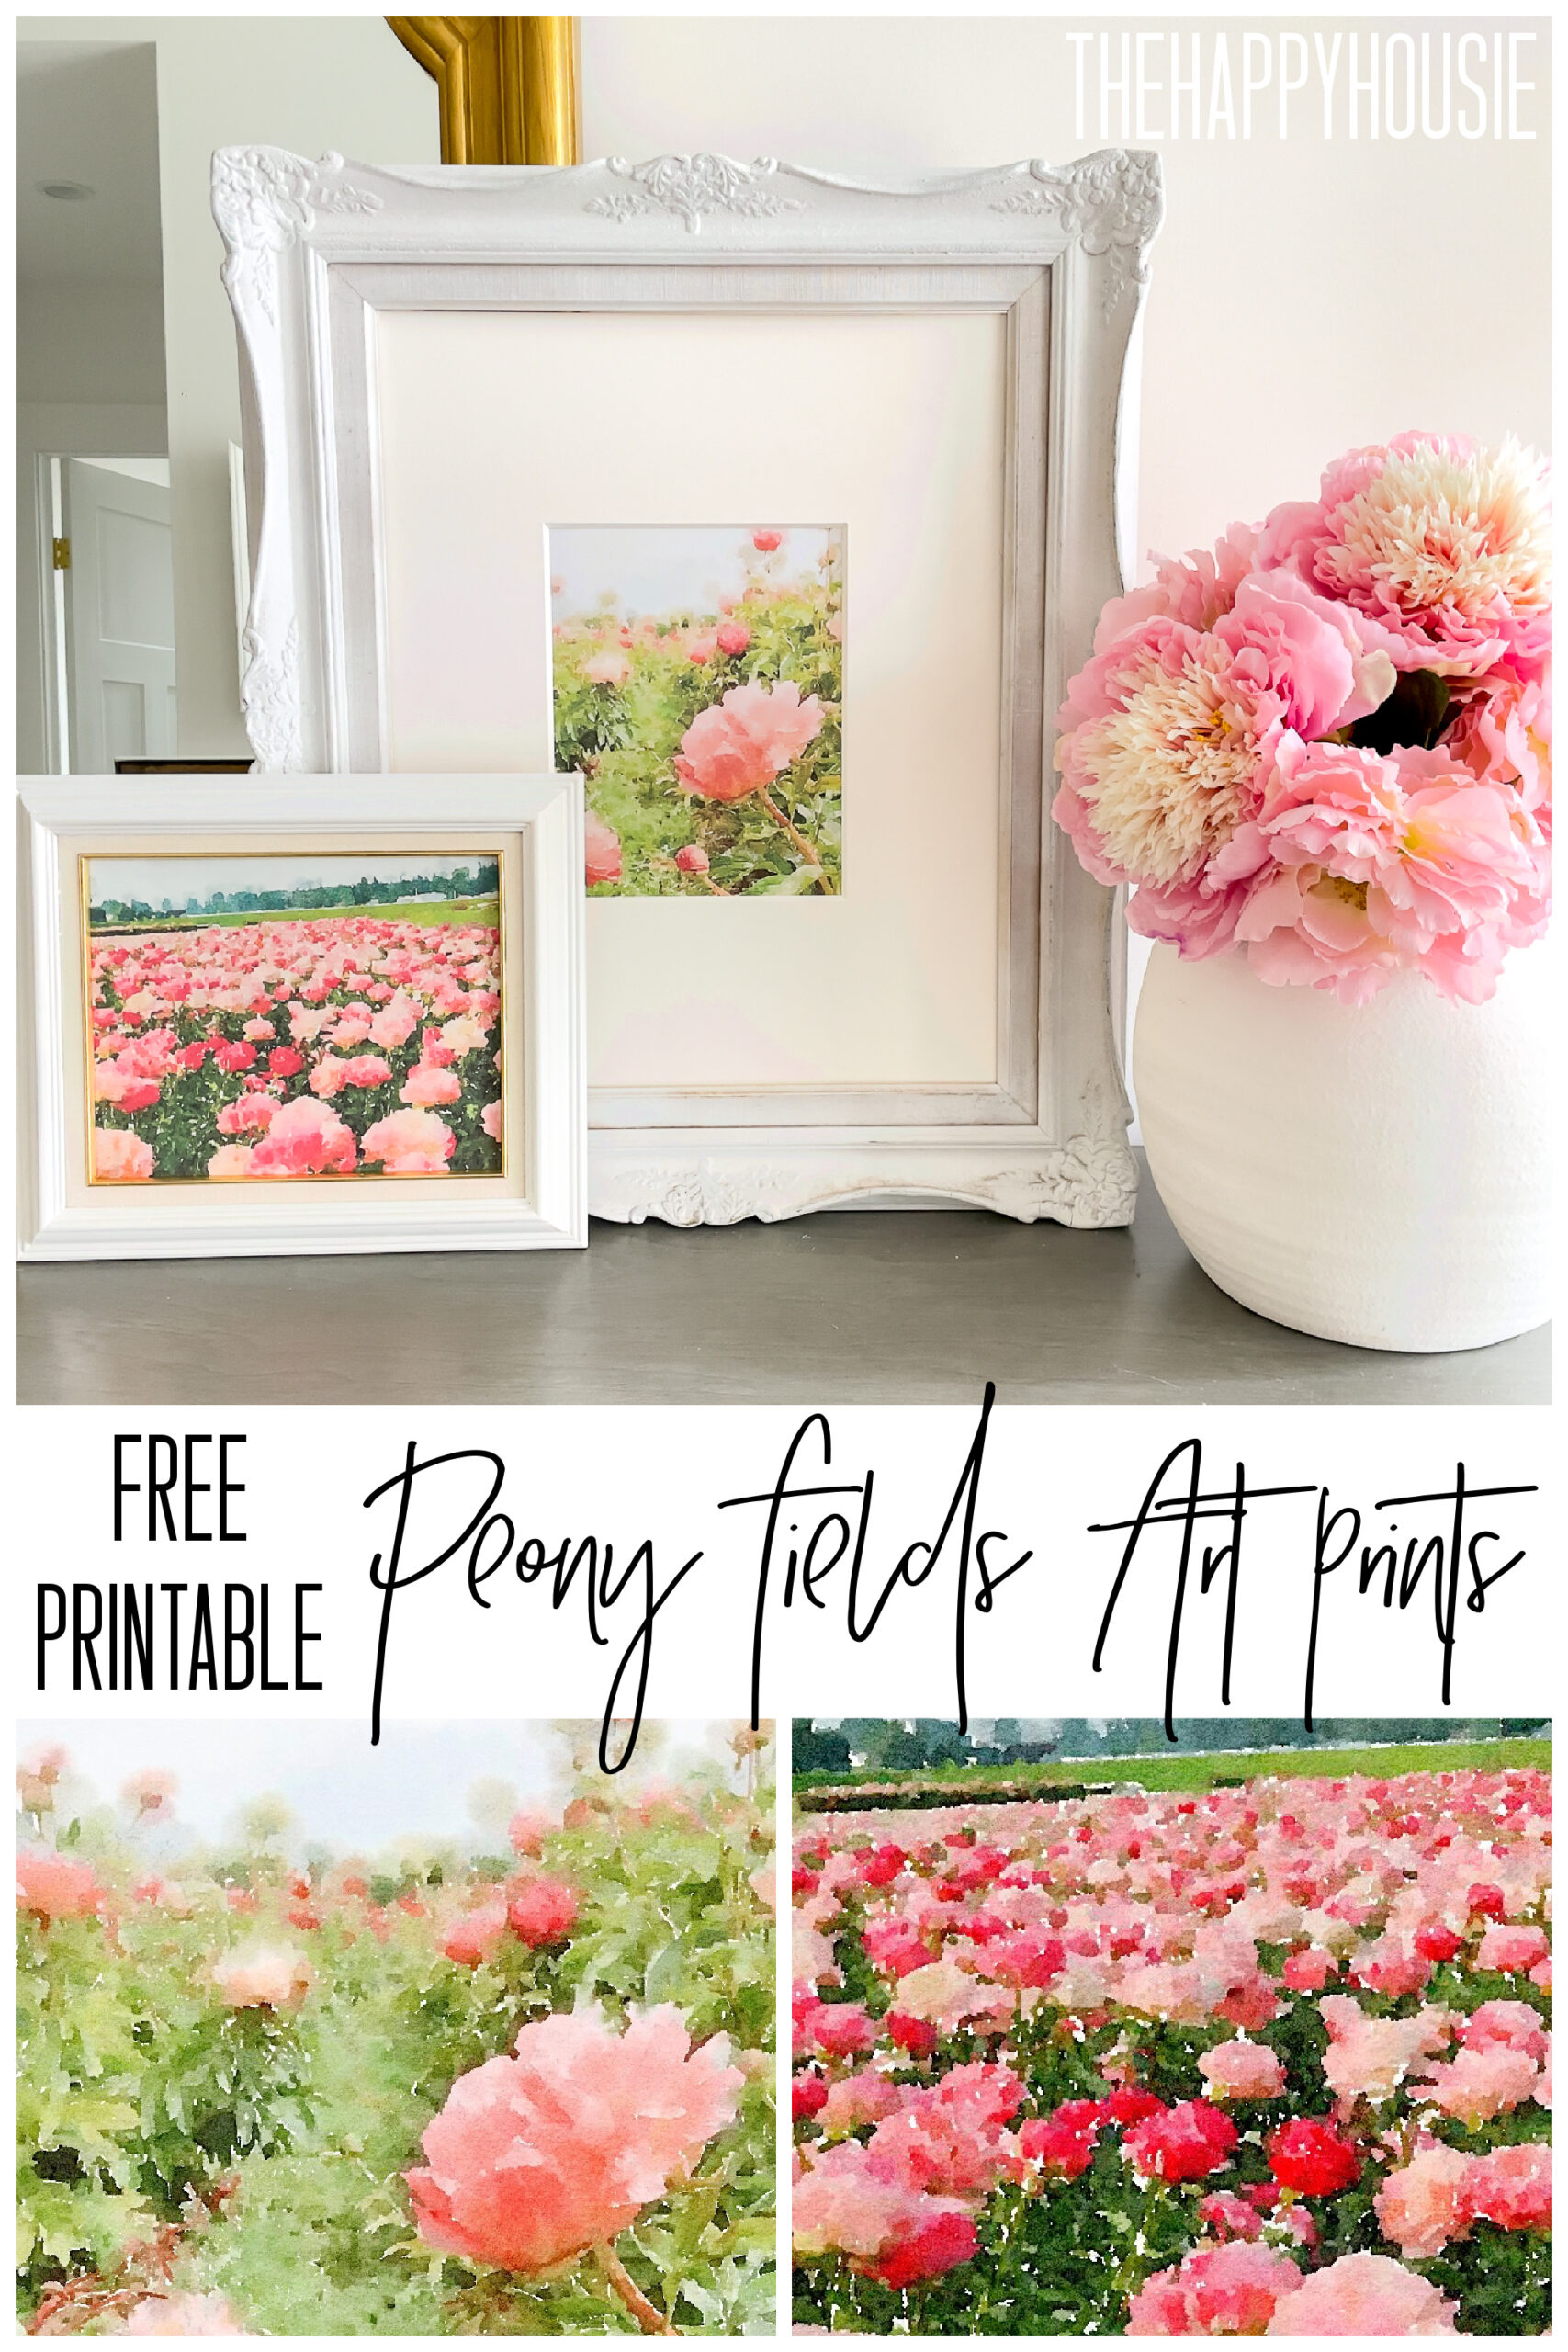 image with text showing free printable peony fields art prints